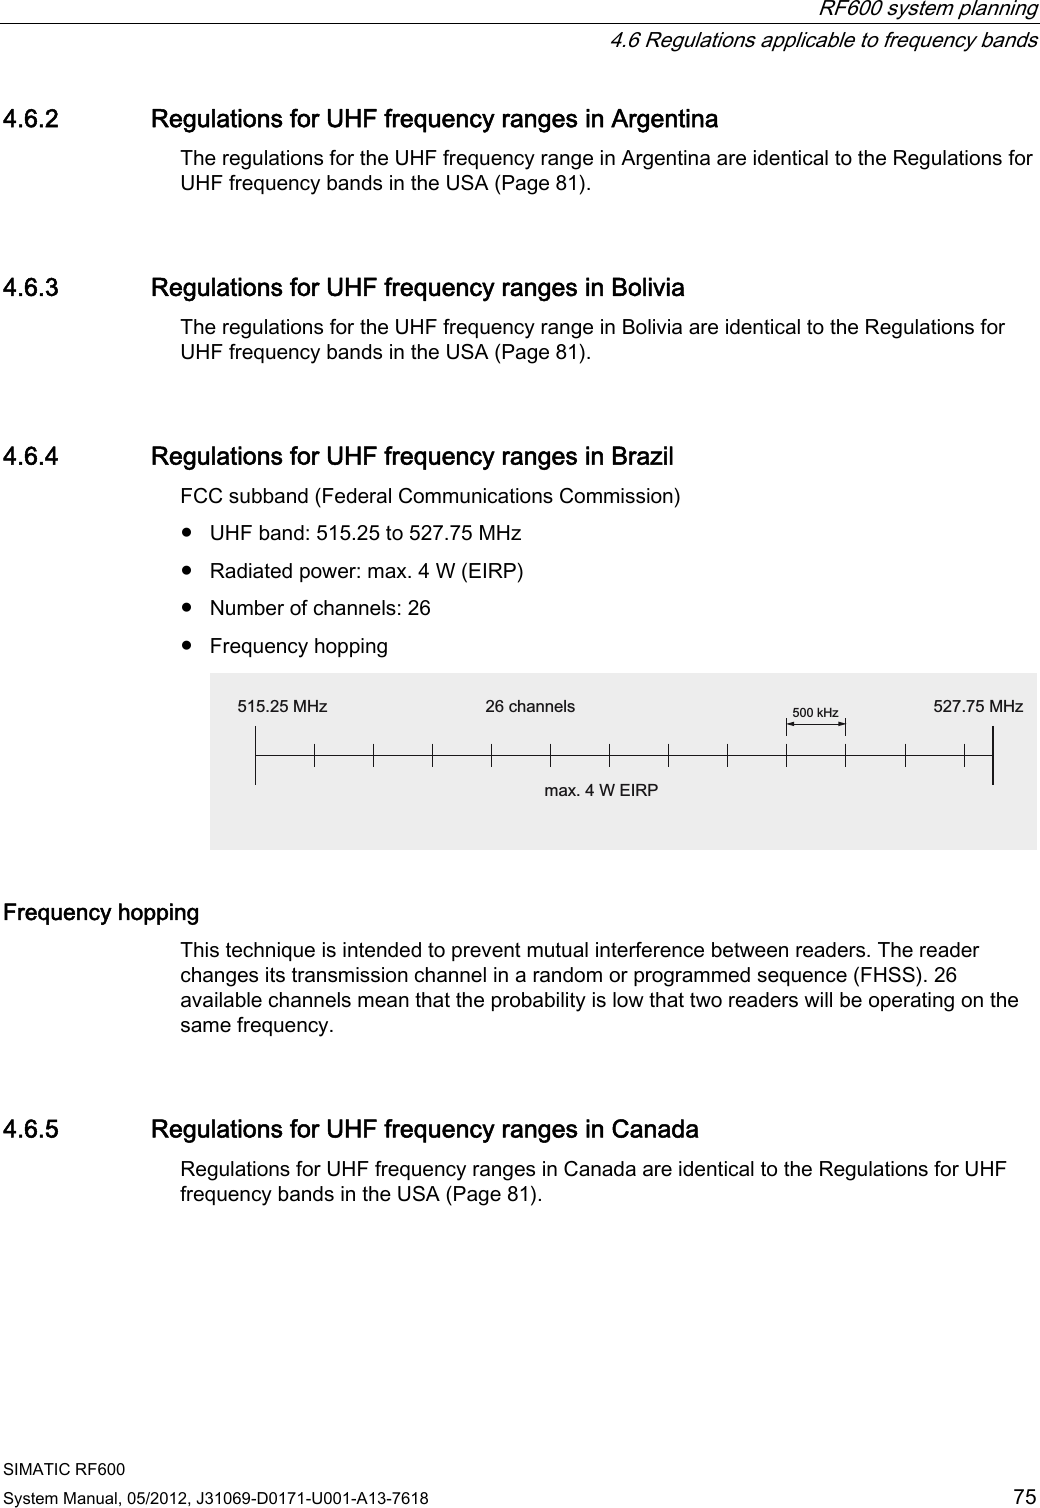  RF600 system planning   4.6 Regulations applicable to frequency bands SIMATIC RF600 System Manual, 05/2012, J31069-D0171-U001-A13-7618  75 4.6.2 Regulations for UHF frequency ranges in Argentina The regulations for the UHF frequency range in Argentina are identical to the Regulations for UHF frequency bands in the USA (Page 81). 4.6.3 Regulations for UHF frequency ranges in Bolivia The regulations for the UHF frequency range in Bolivia are identical to the Regulations for UHF frequency bands in the USA (Page 81). 4.6.4 Regulations for UHF frequency ranges in Brazil FCC subband (Federal Communications Commission) ●  UHF band: 515.25 to 527.75 MHz ●  Radiated power: max. 4 W (EIRP) ●  Number of channels: 26 ●  Frequency hopping N+]0+] 0+]FKDQQHOVPD[:(,53 Frequency hopping This technique is intended to prevent mutual interference between readers. The reader changes its transmission channel in a random or programmed sequence (FHSS). 26 available channels mean that the probability is low that two readers will be operating on the same frequency. 4.6.5 Regulations for UHF frequency ranges in Canada Regulations for UHF frequency ranges in Canada are identical to the Regulations for UHF frequency bands in the USA (Page 81). 